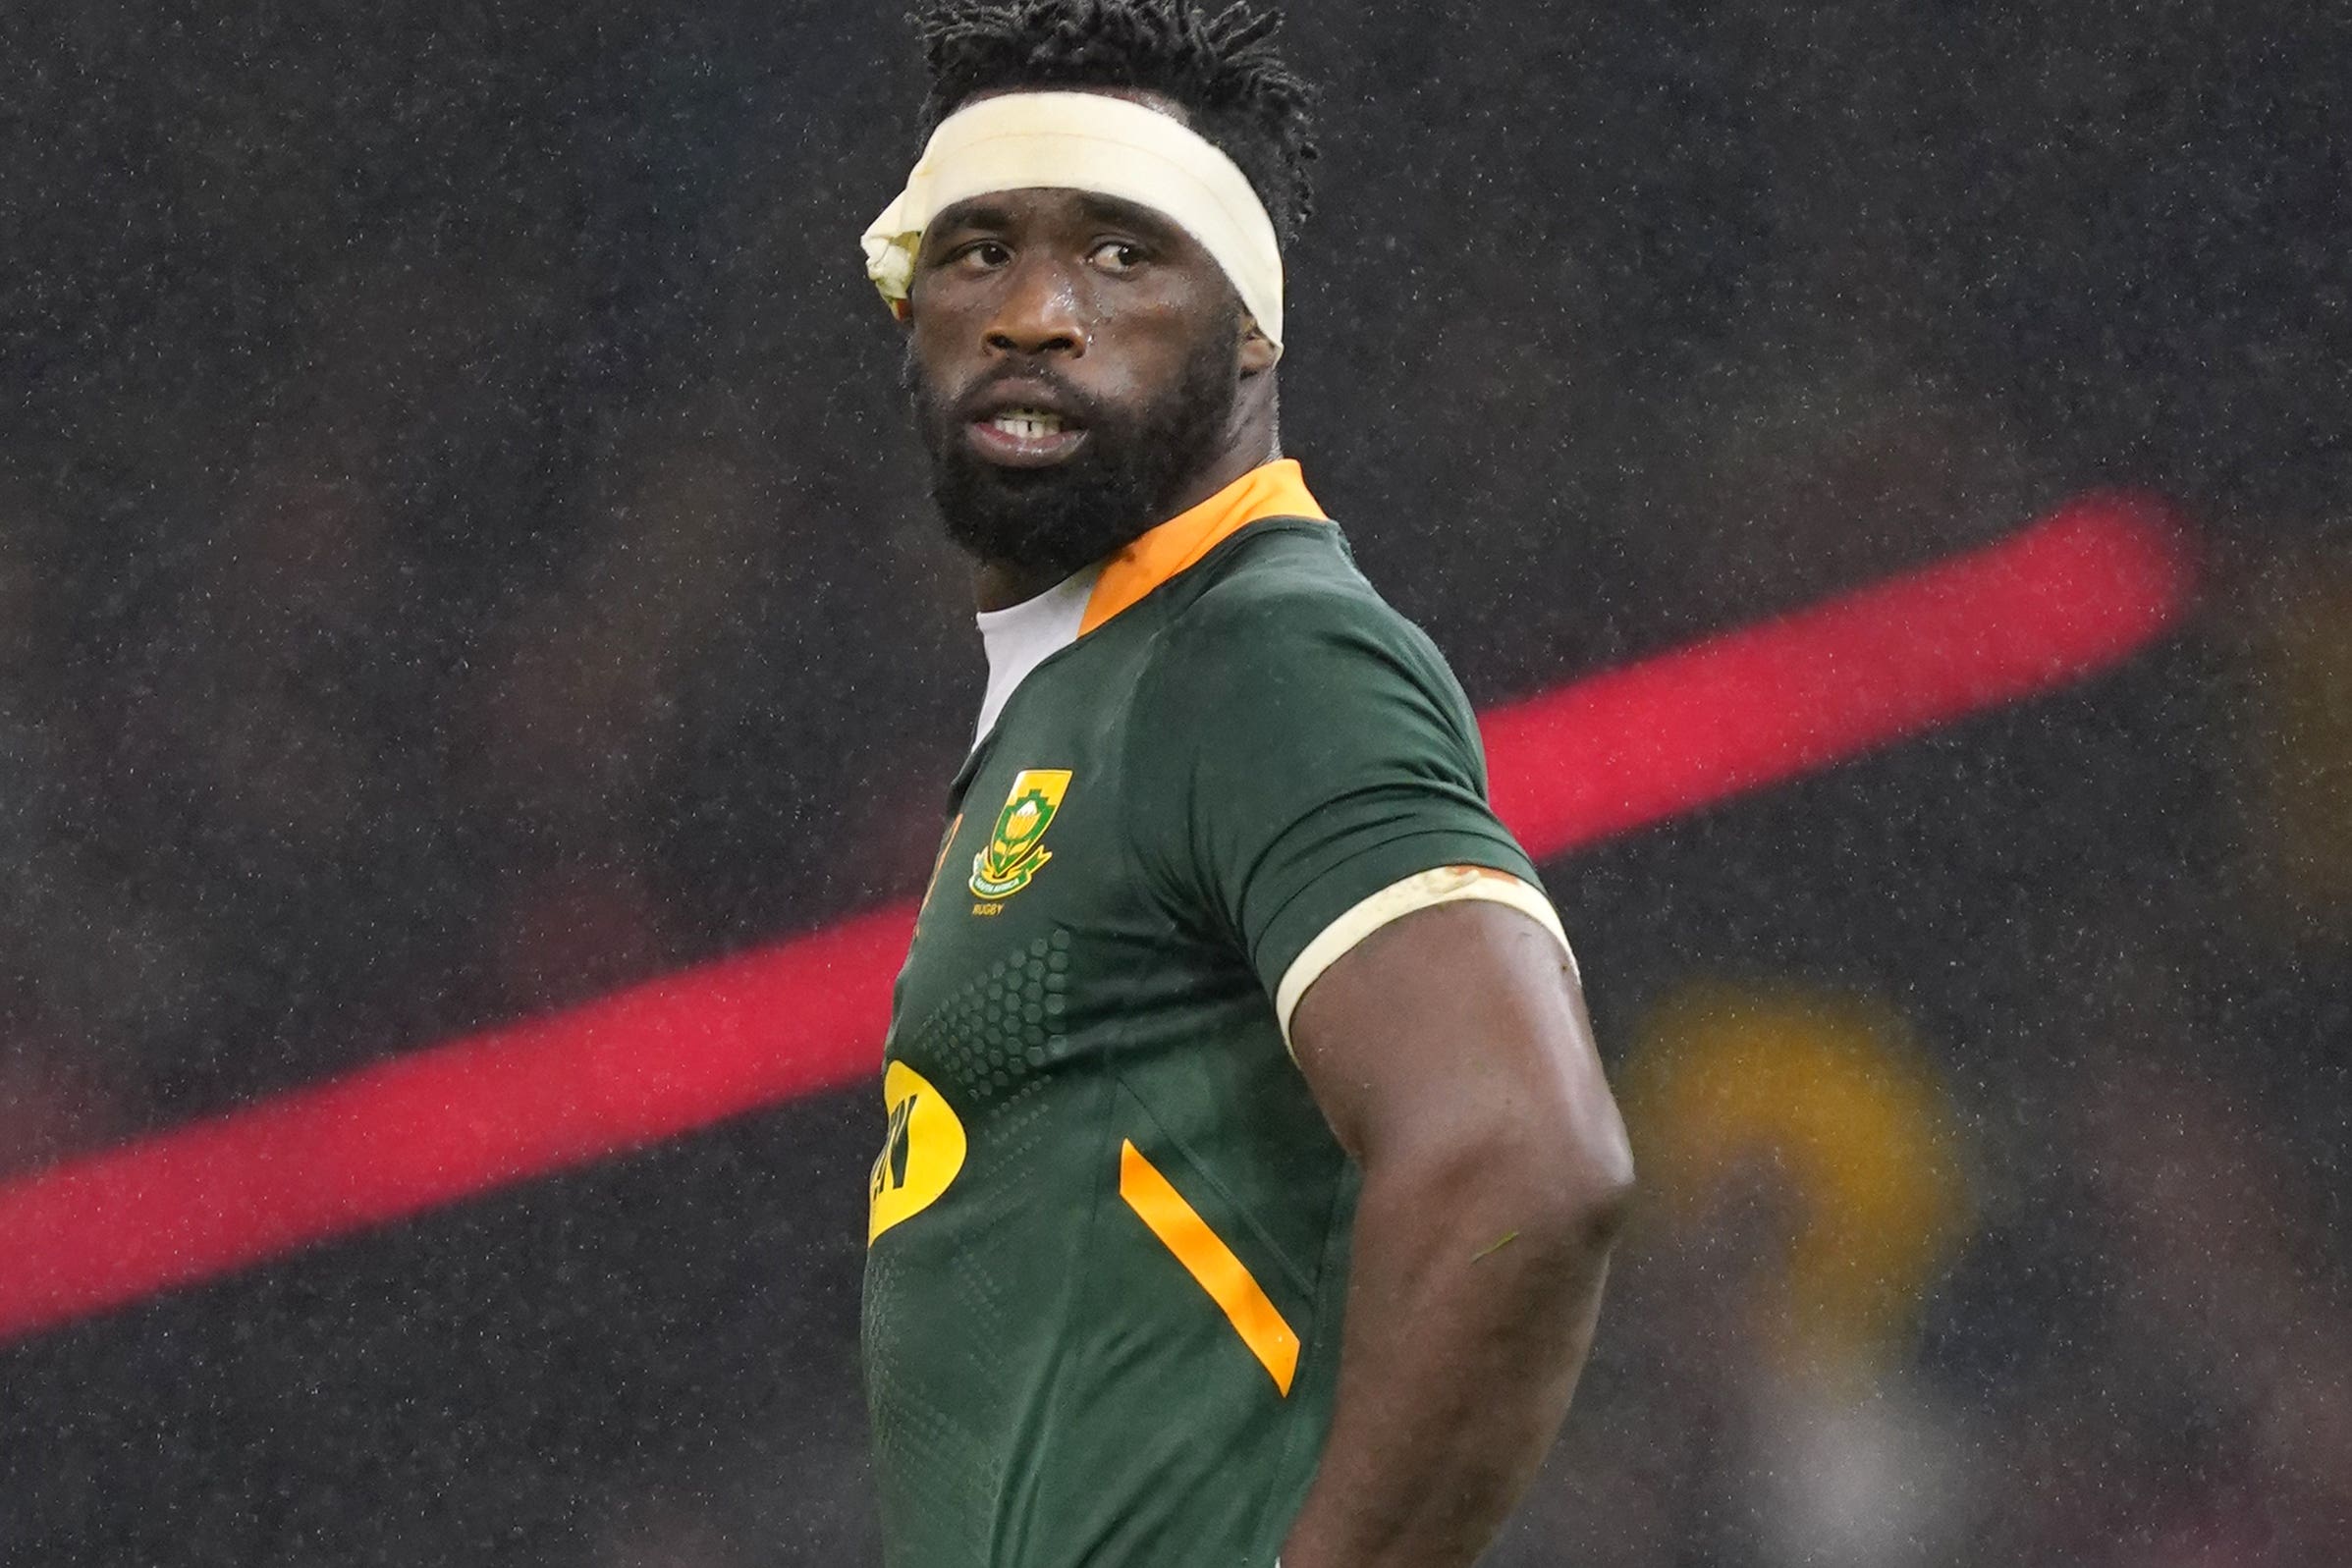 Siya Kolisi is currently injured but the Springboks skipper has been included in the squad